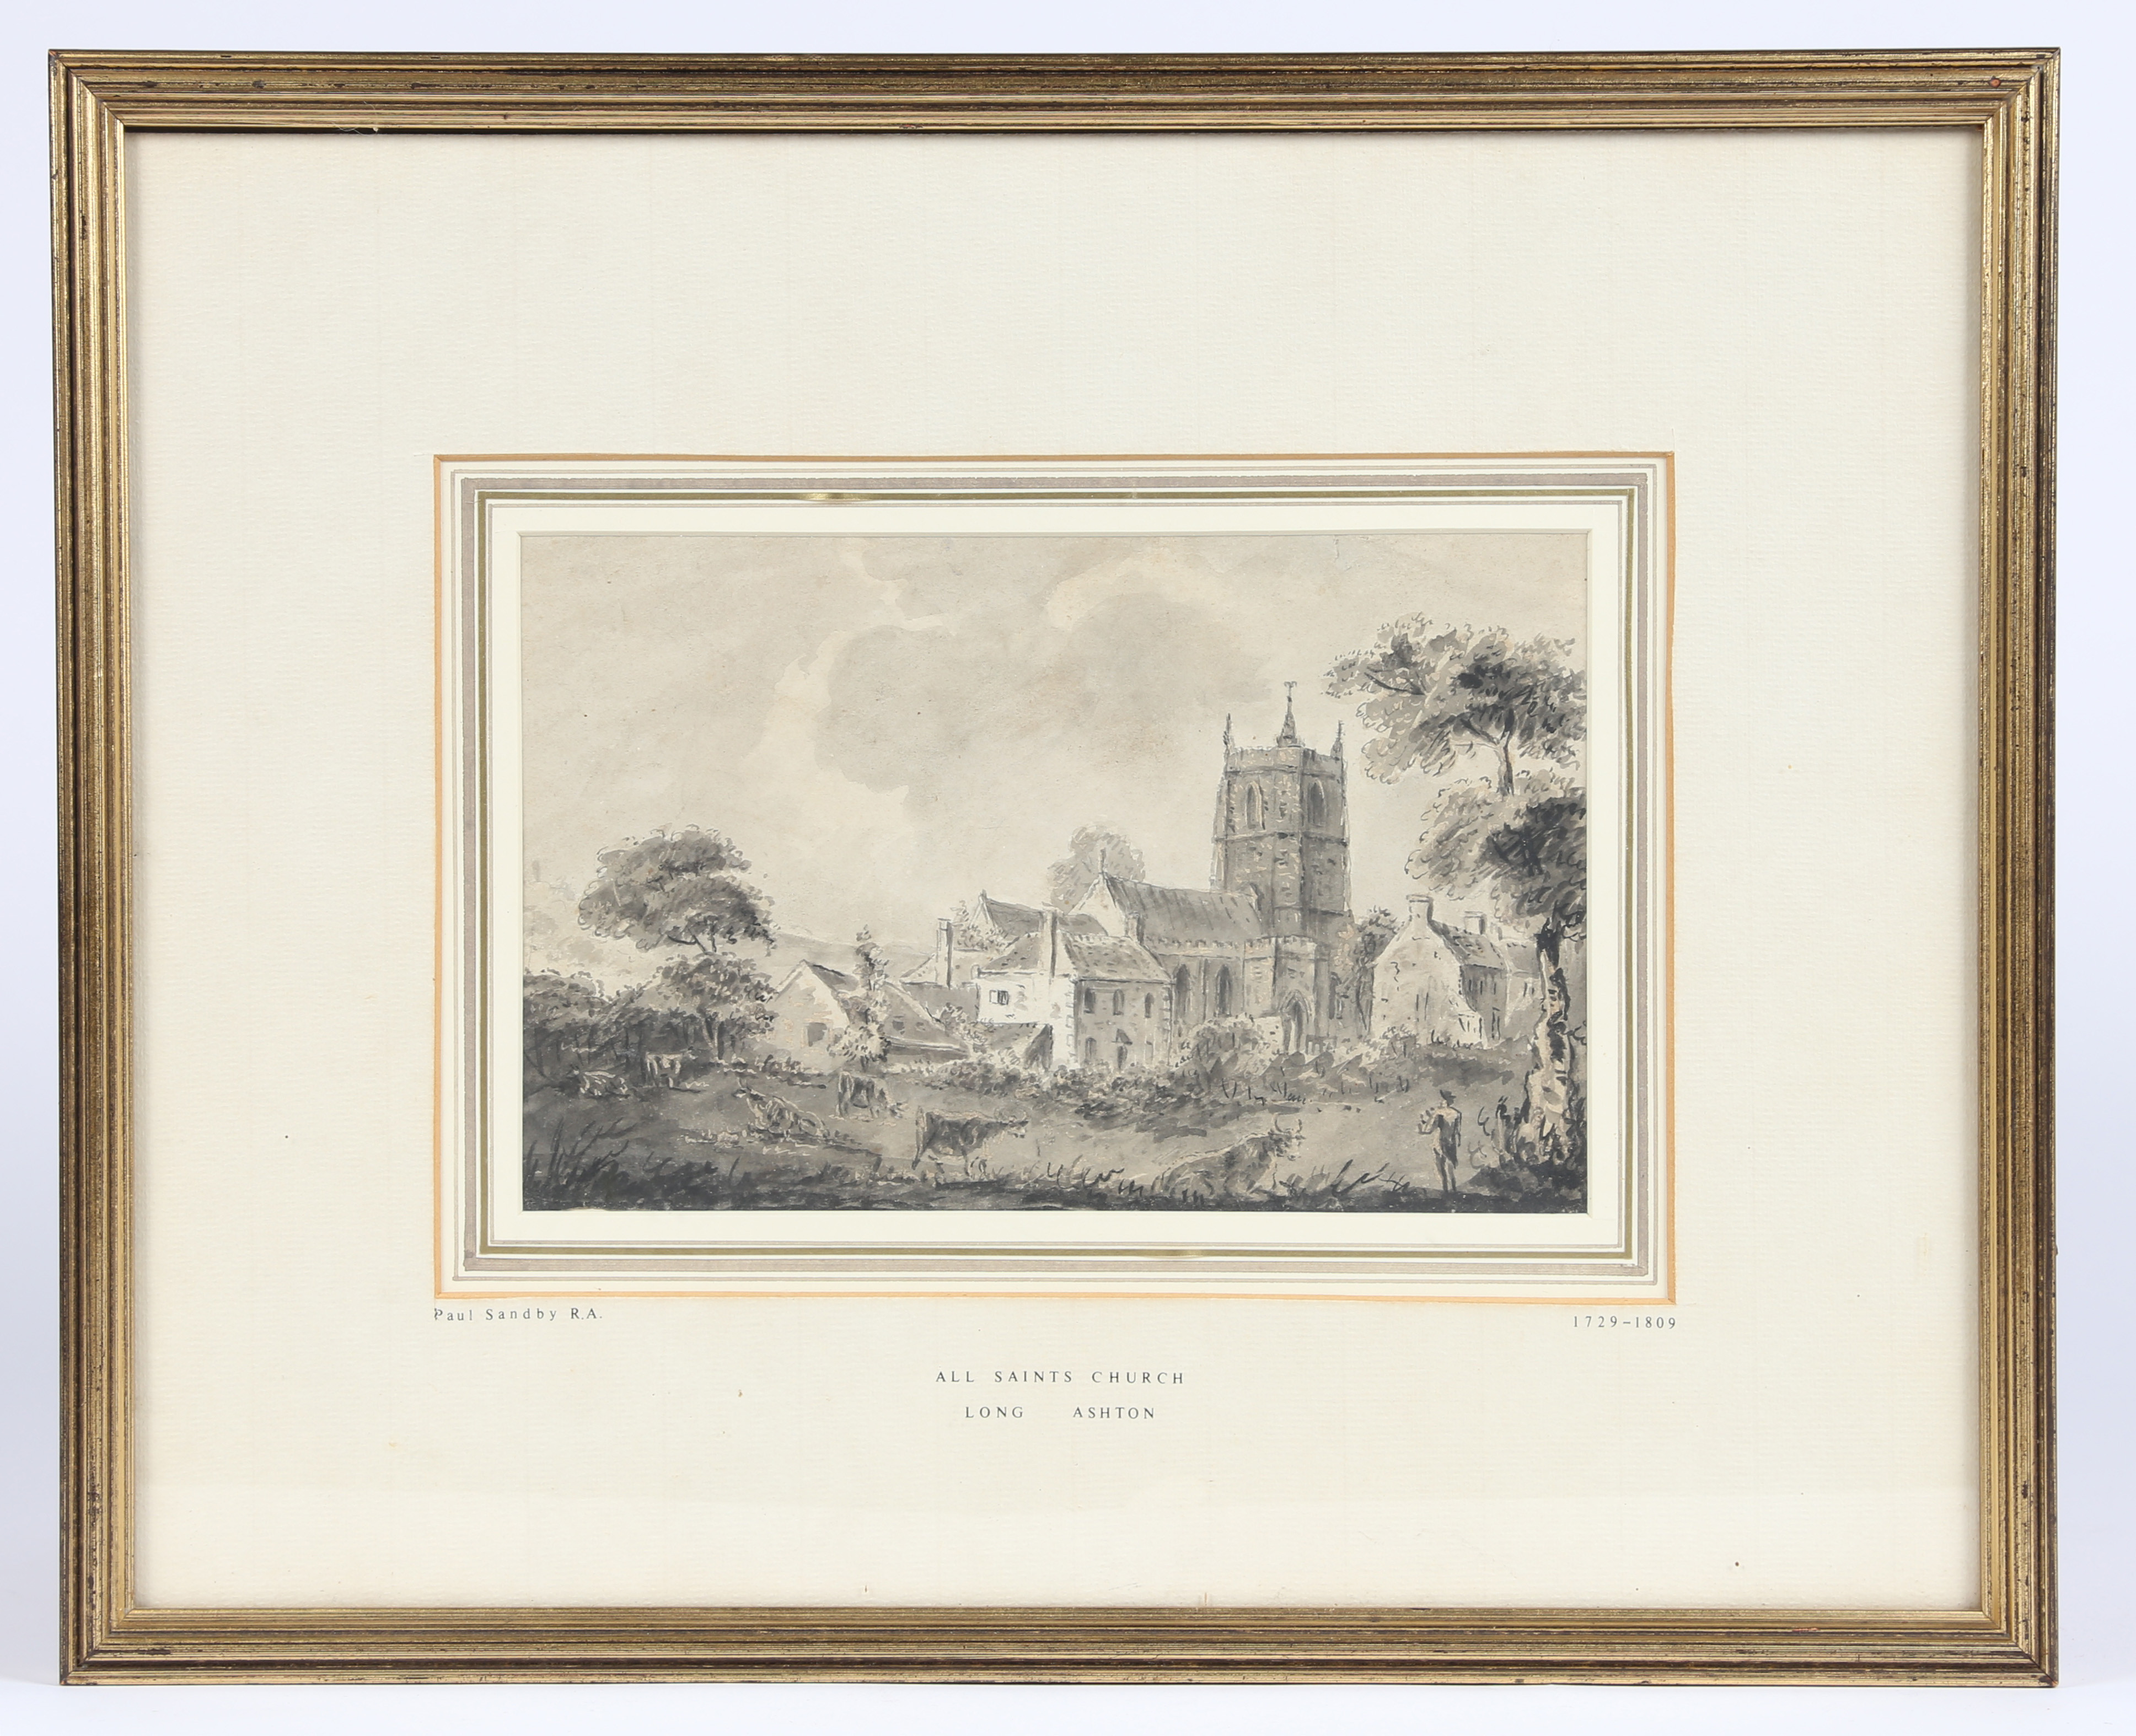 ATTRIBUTED TO PAUL SANDBY, R.A (BRITISH, 1729-1809).